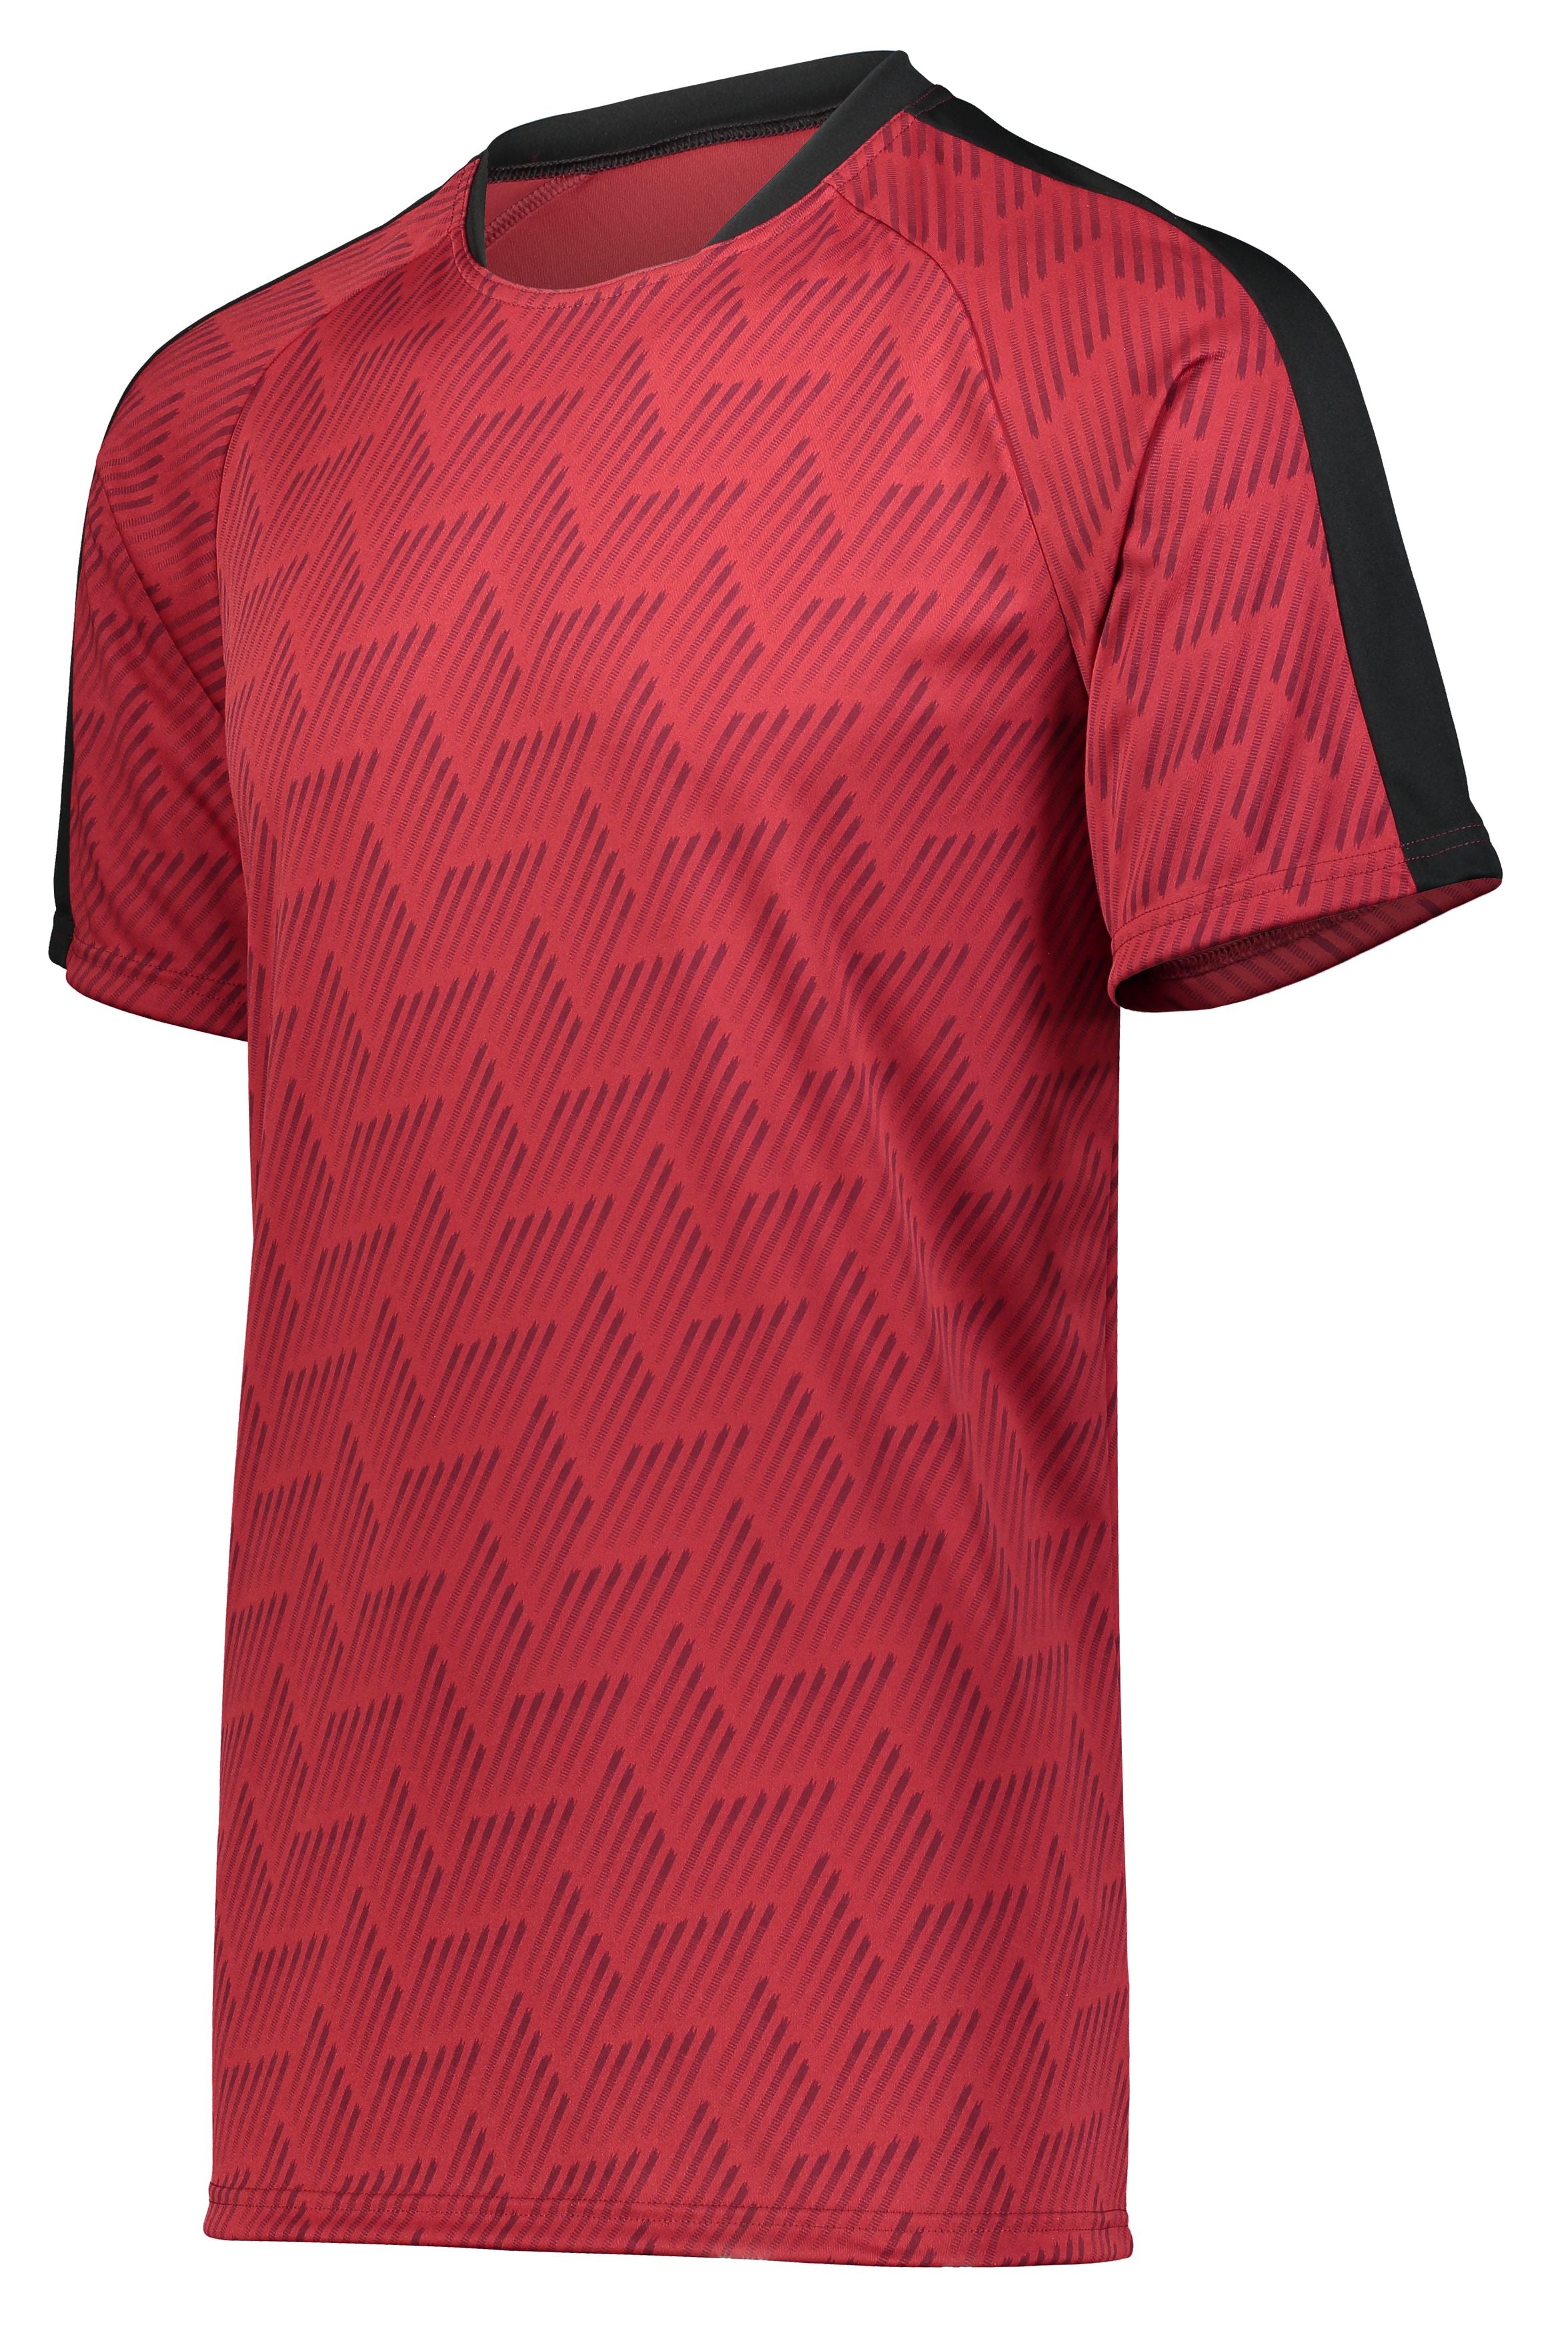 High 5 Youth Hypervolt Jersey in Maroon Print/Black  -Part of the Youth, Youth-Jersey, High5-Products, Soccer, Shirts, All-Sports-1 product lines at KanaleyCreations.com